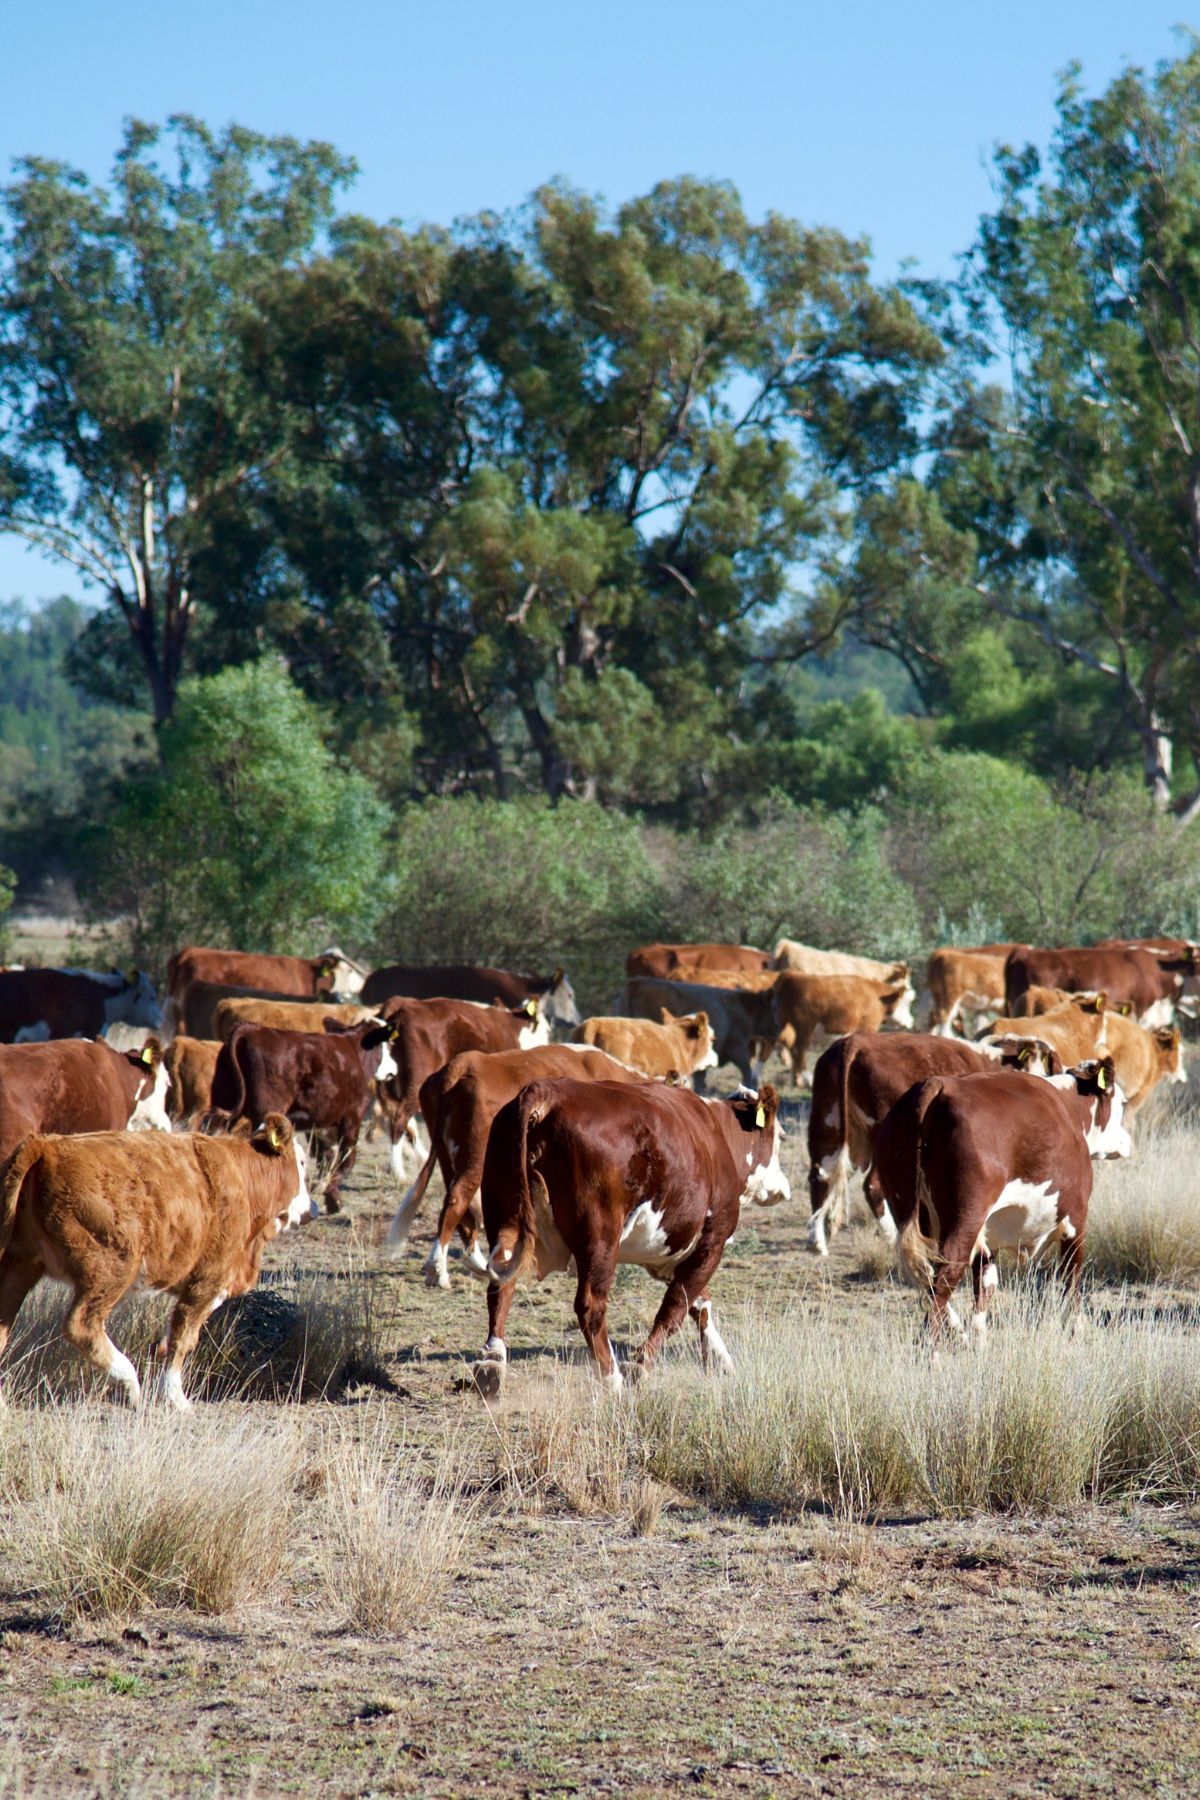 cattle walking away in a pasture.